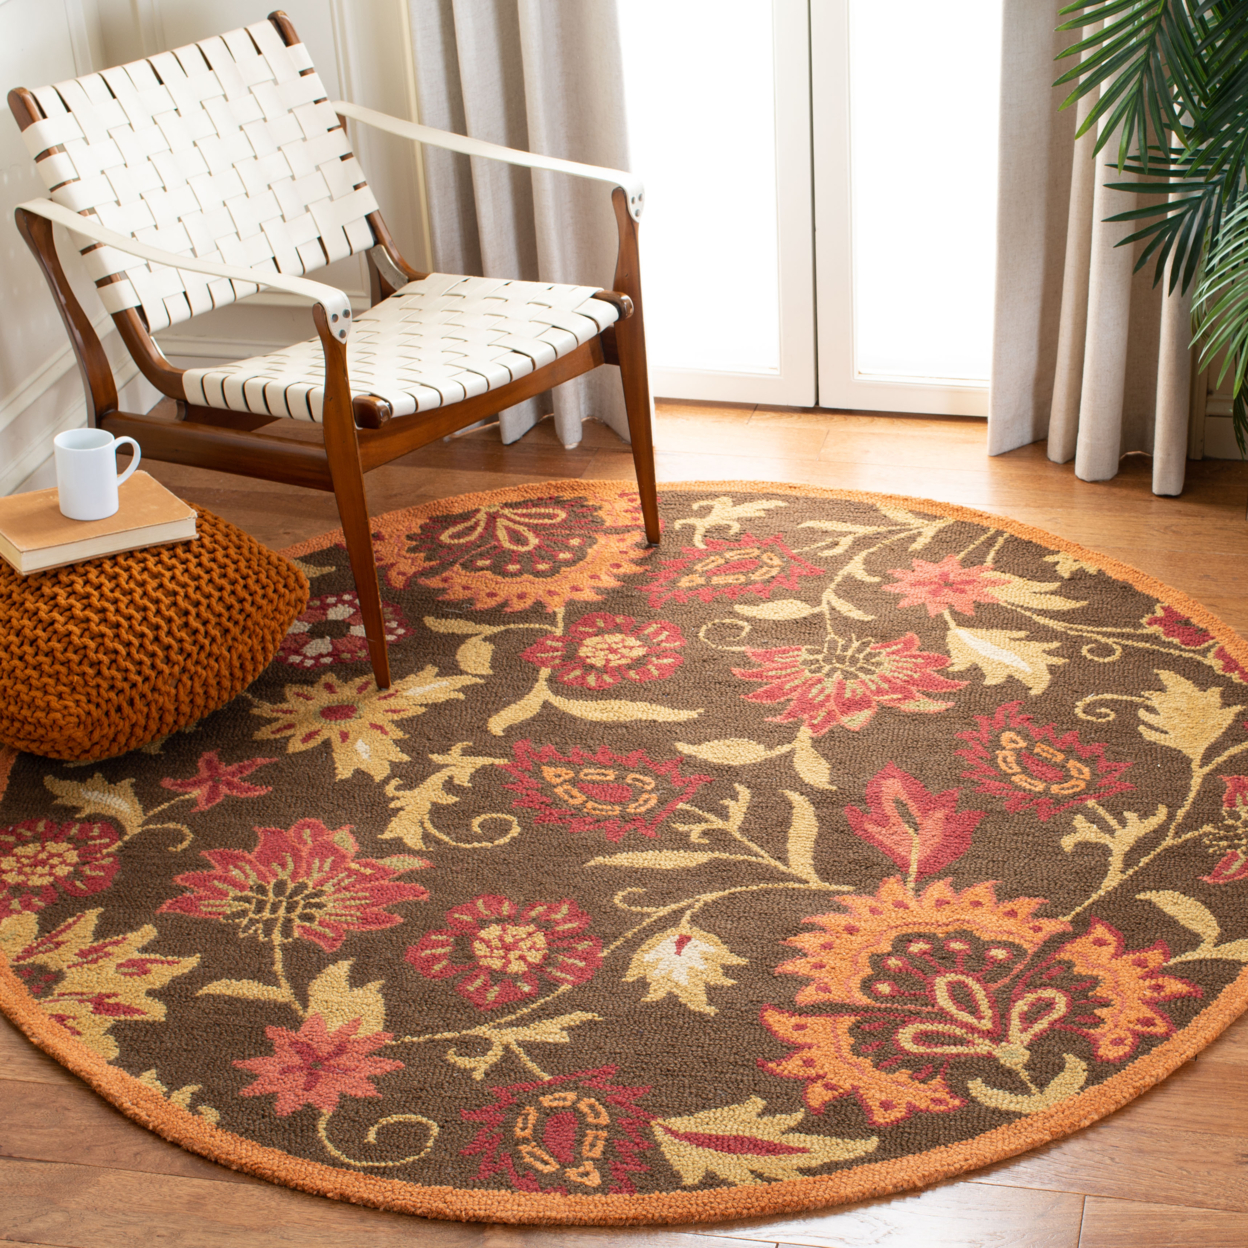 SAFAVIEH Blossom BLM861A Hand-hooked Brown / Multi Rug - 2' 3 X 10'